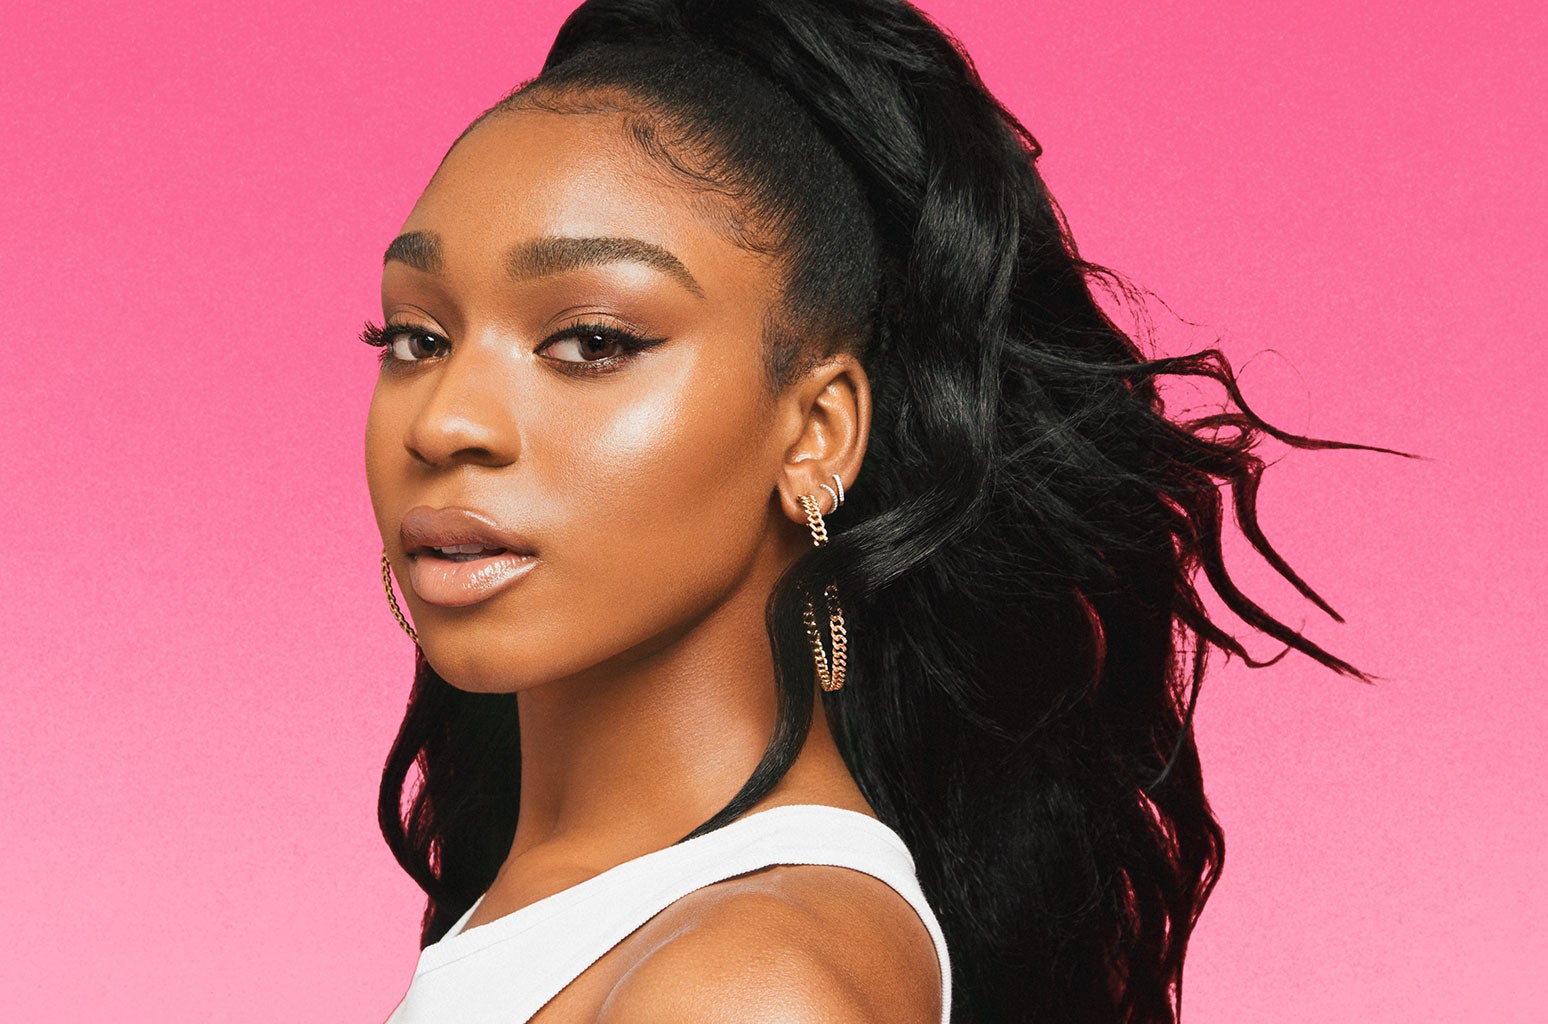 Find Motivation From Normani's Collab With Fabletics